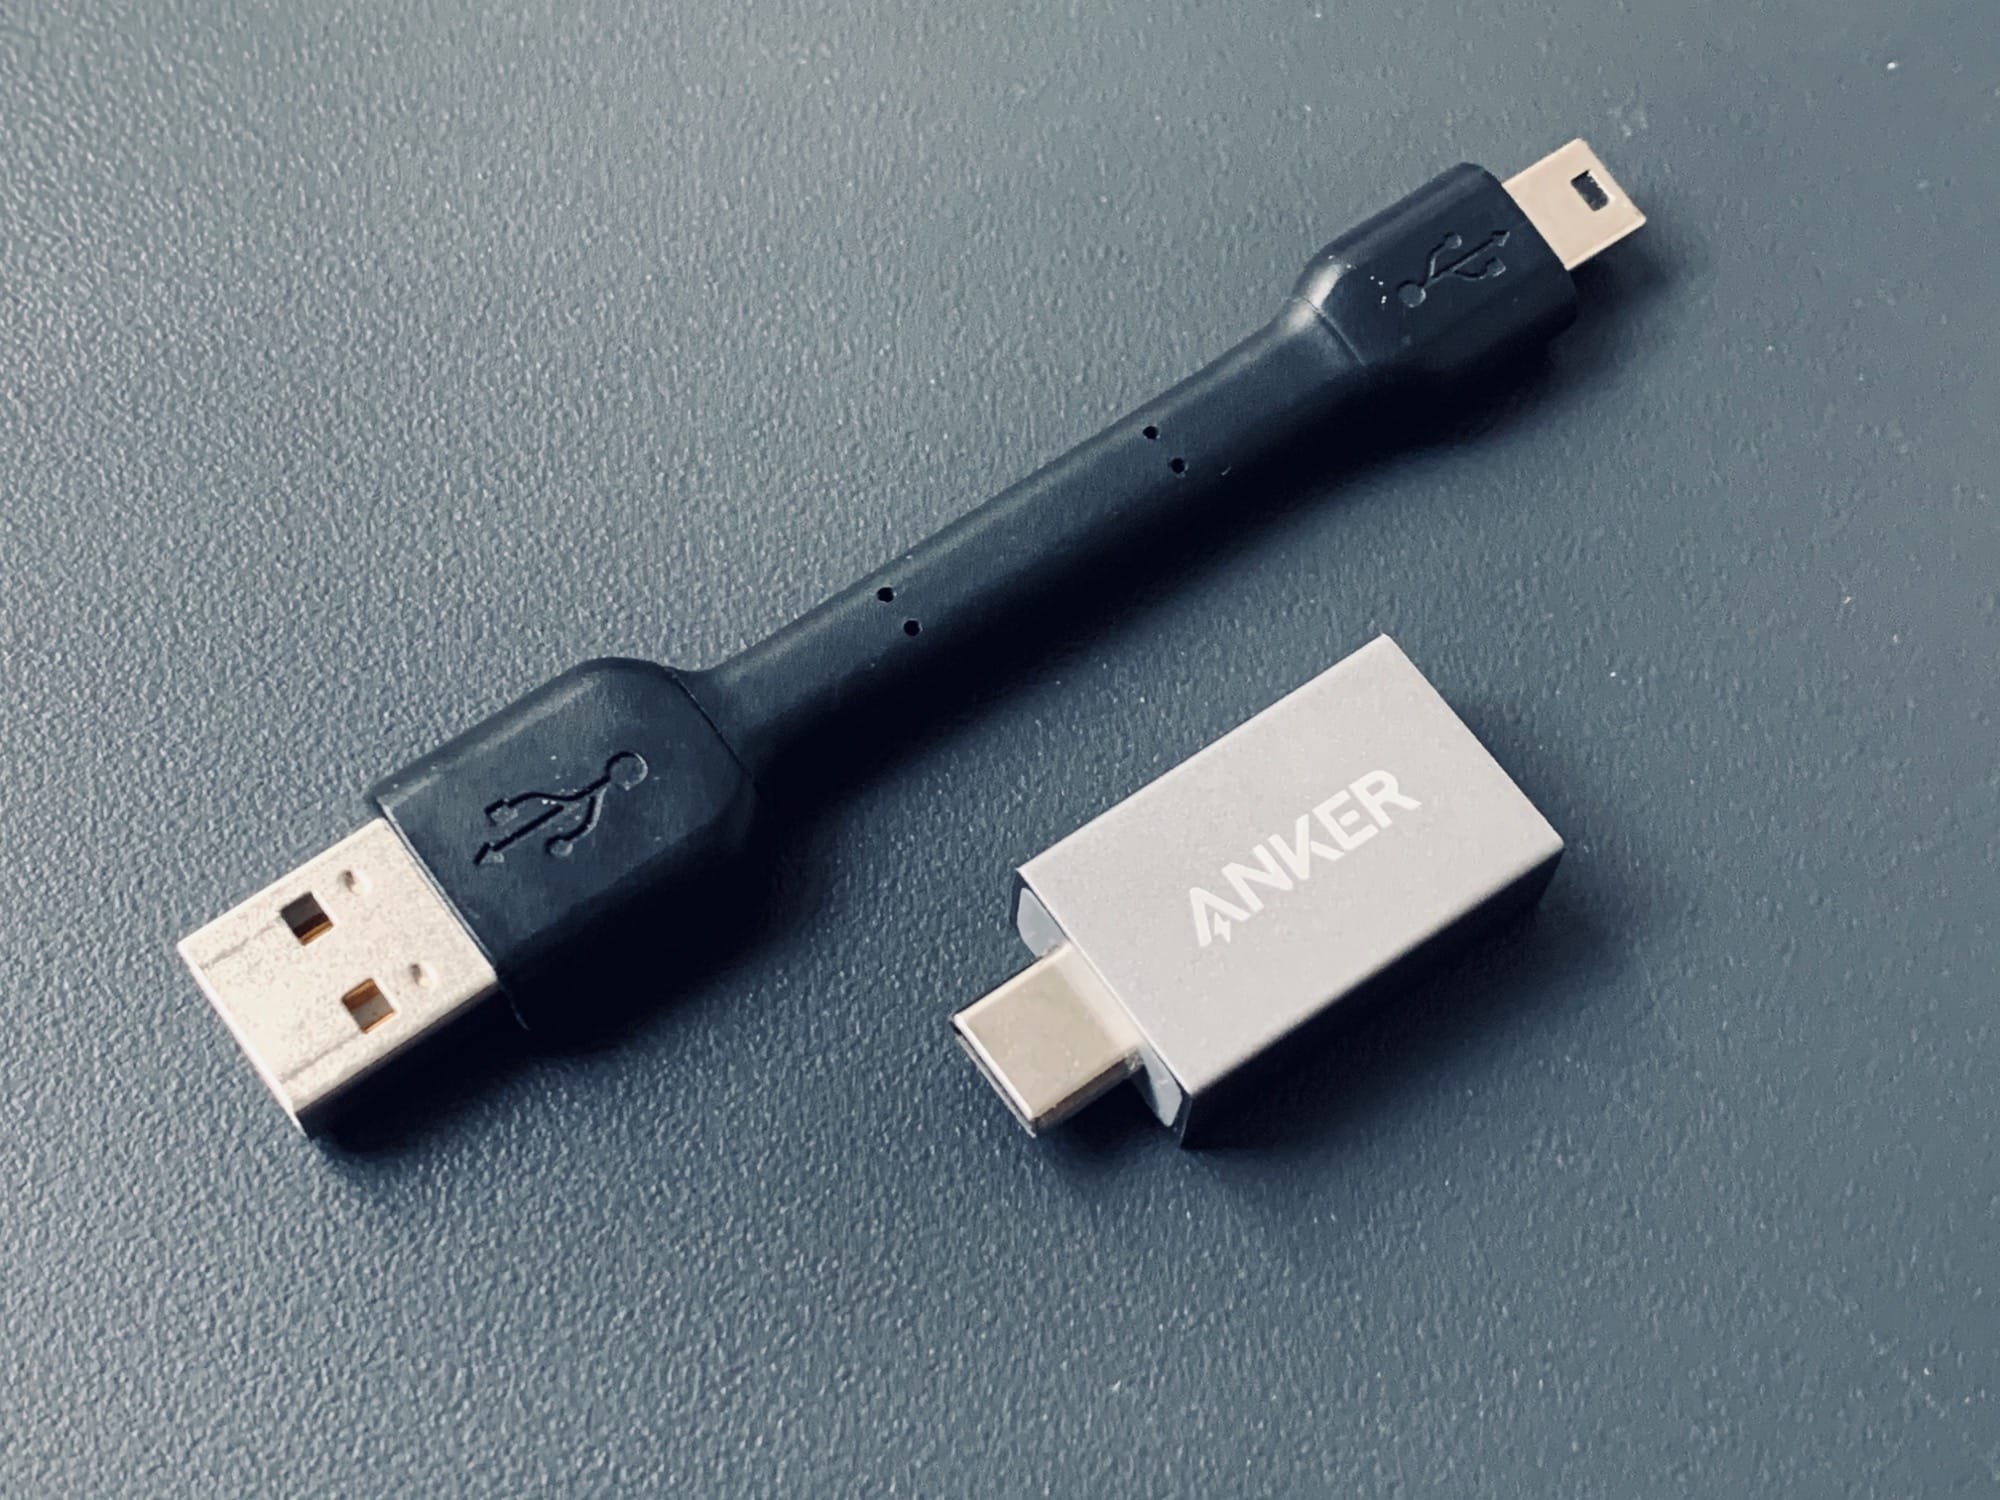 The Anker USB-C to USB-A Female Adapter is truly tiny.